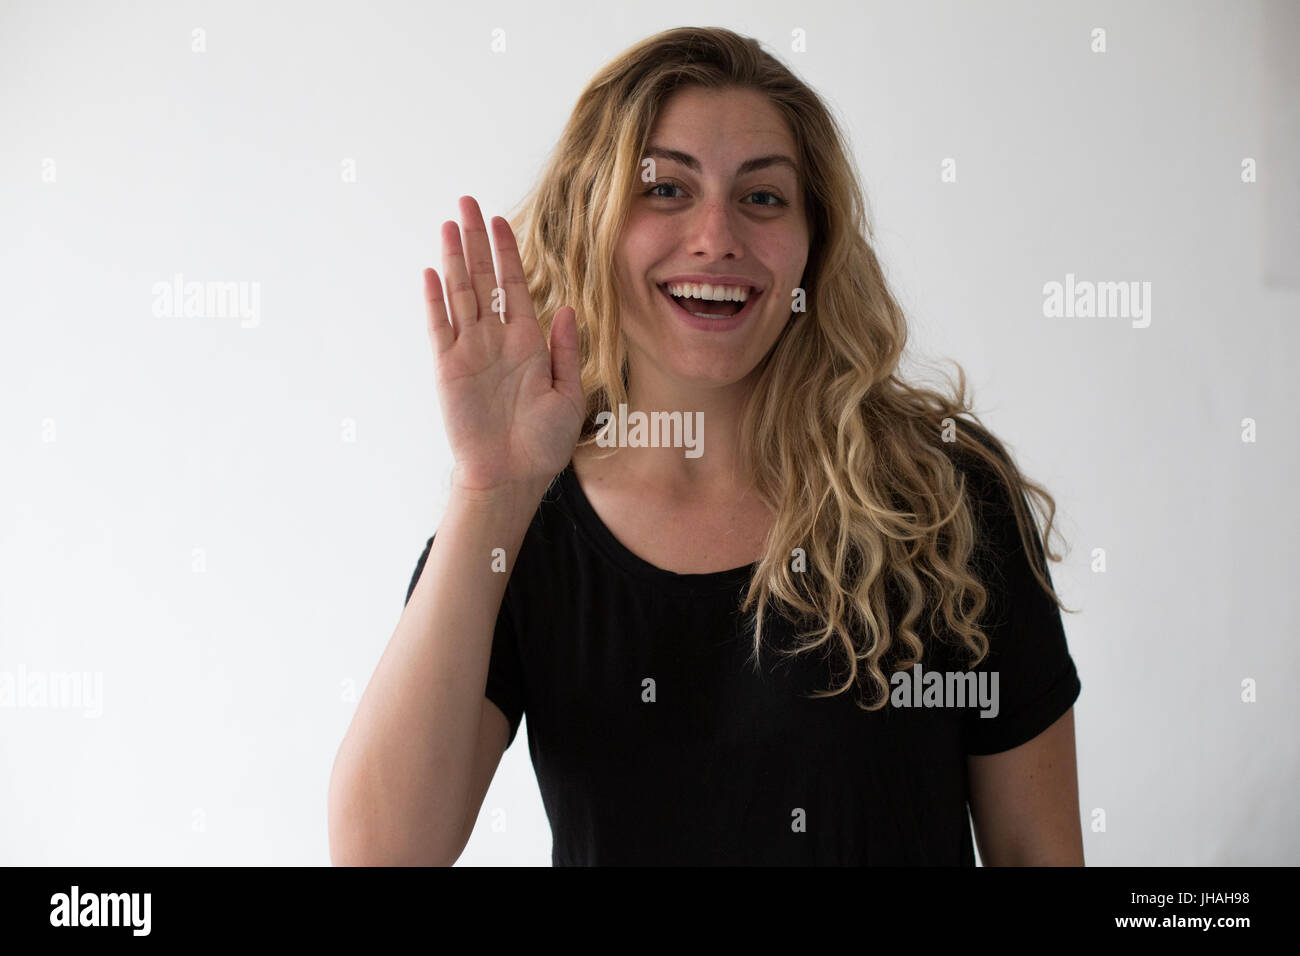 Young, blonde, beautiful, caucasian milennial woman expressing excitement and happiness while waving against a white background. Inviting, welcoming. Stock Photo